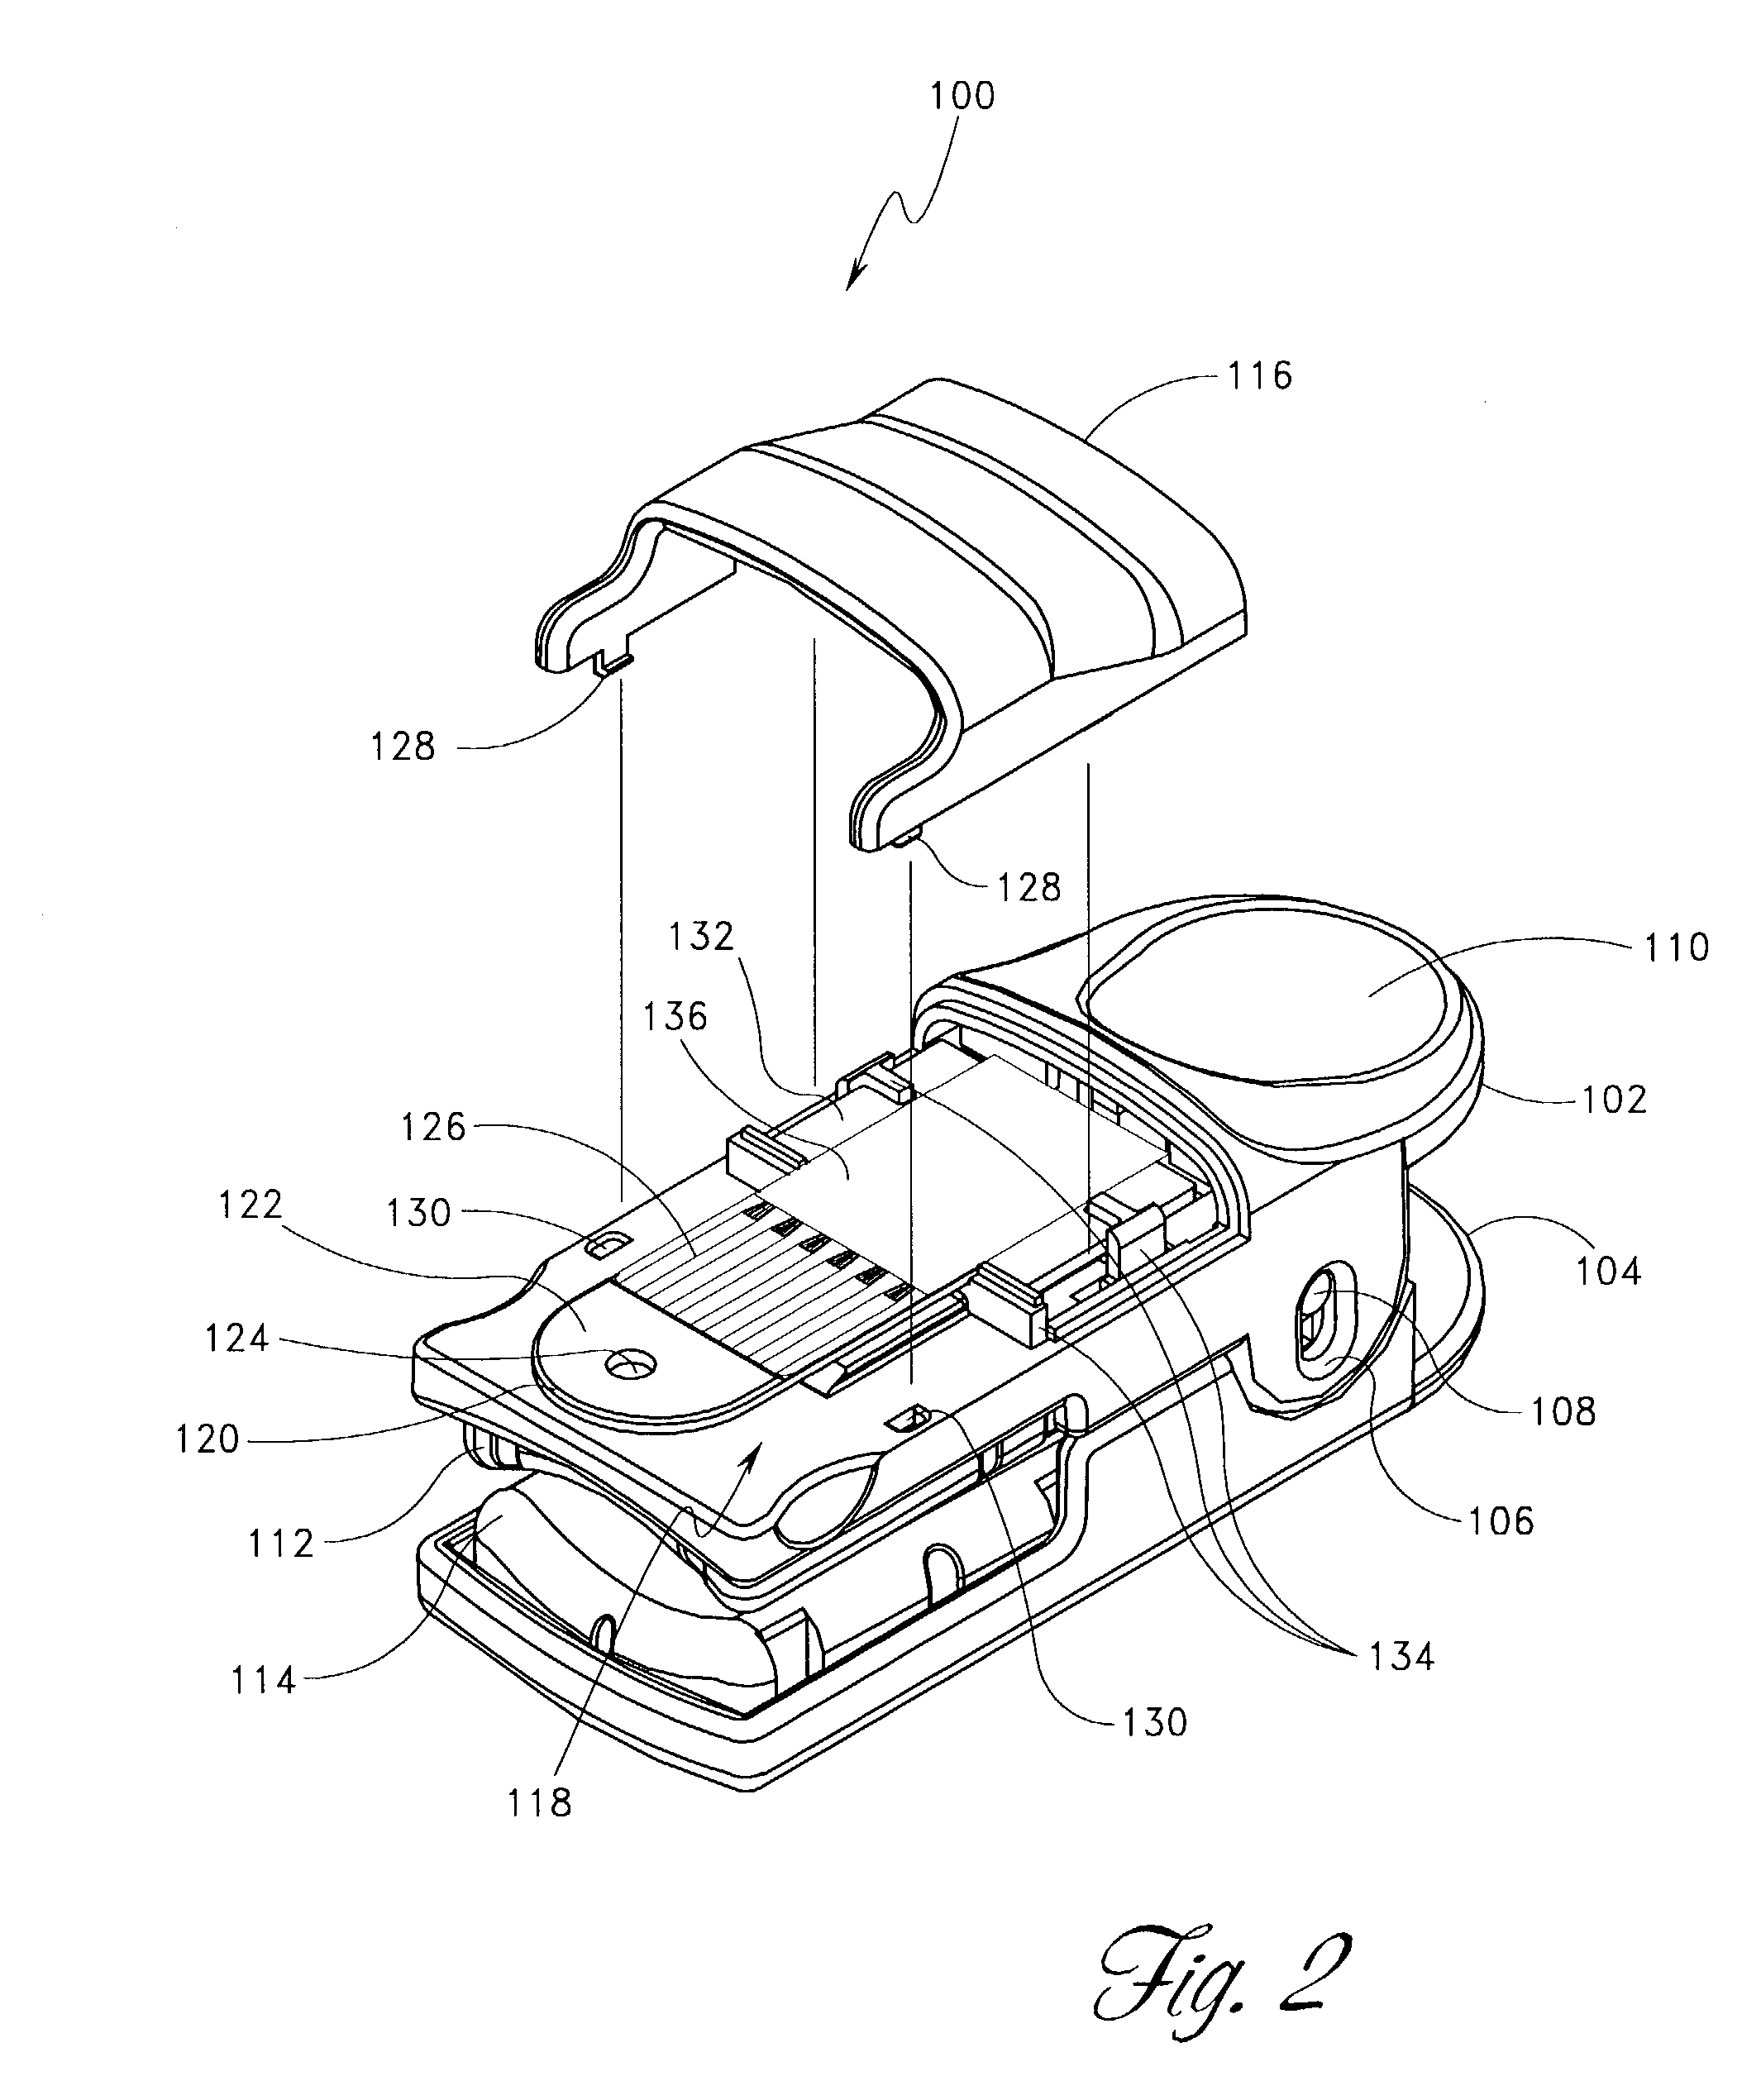 Shielded optical probe having an electrical connector